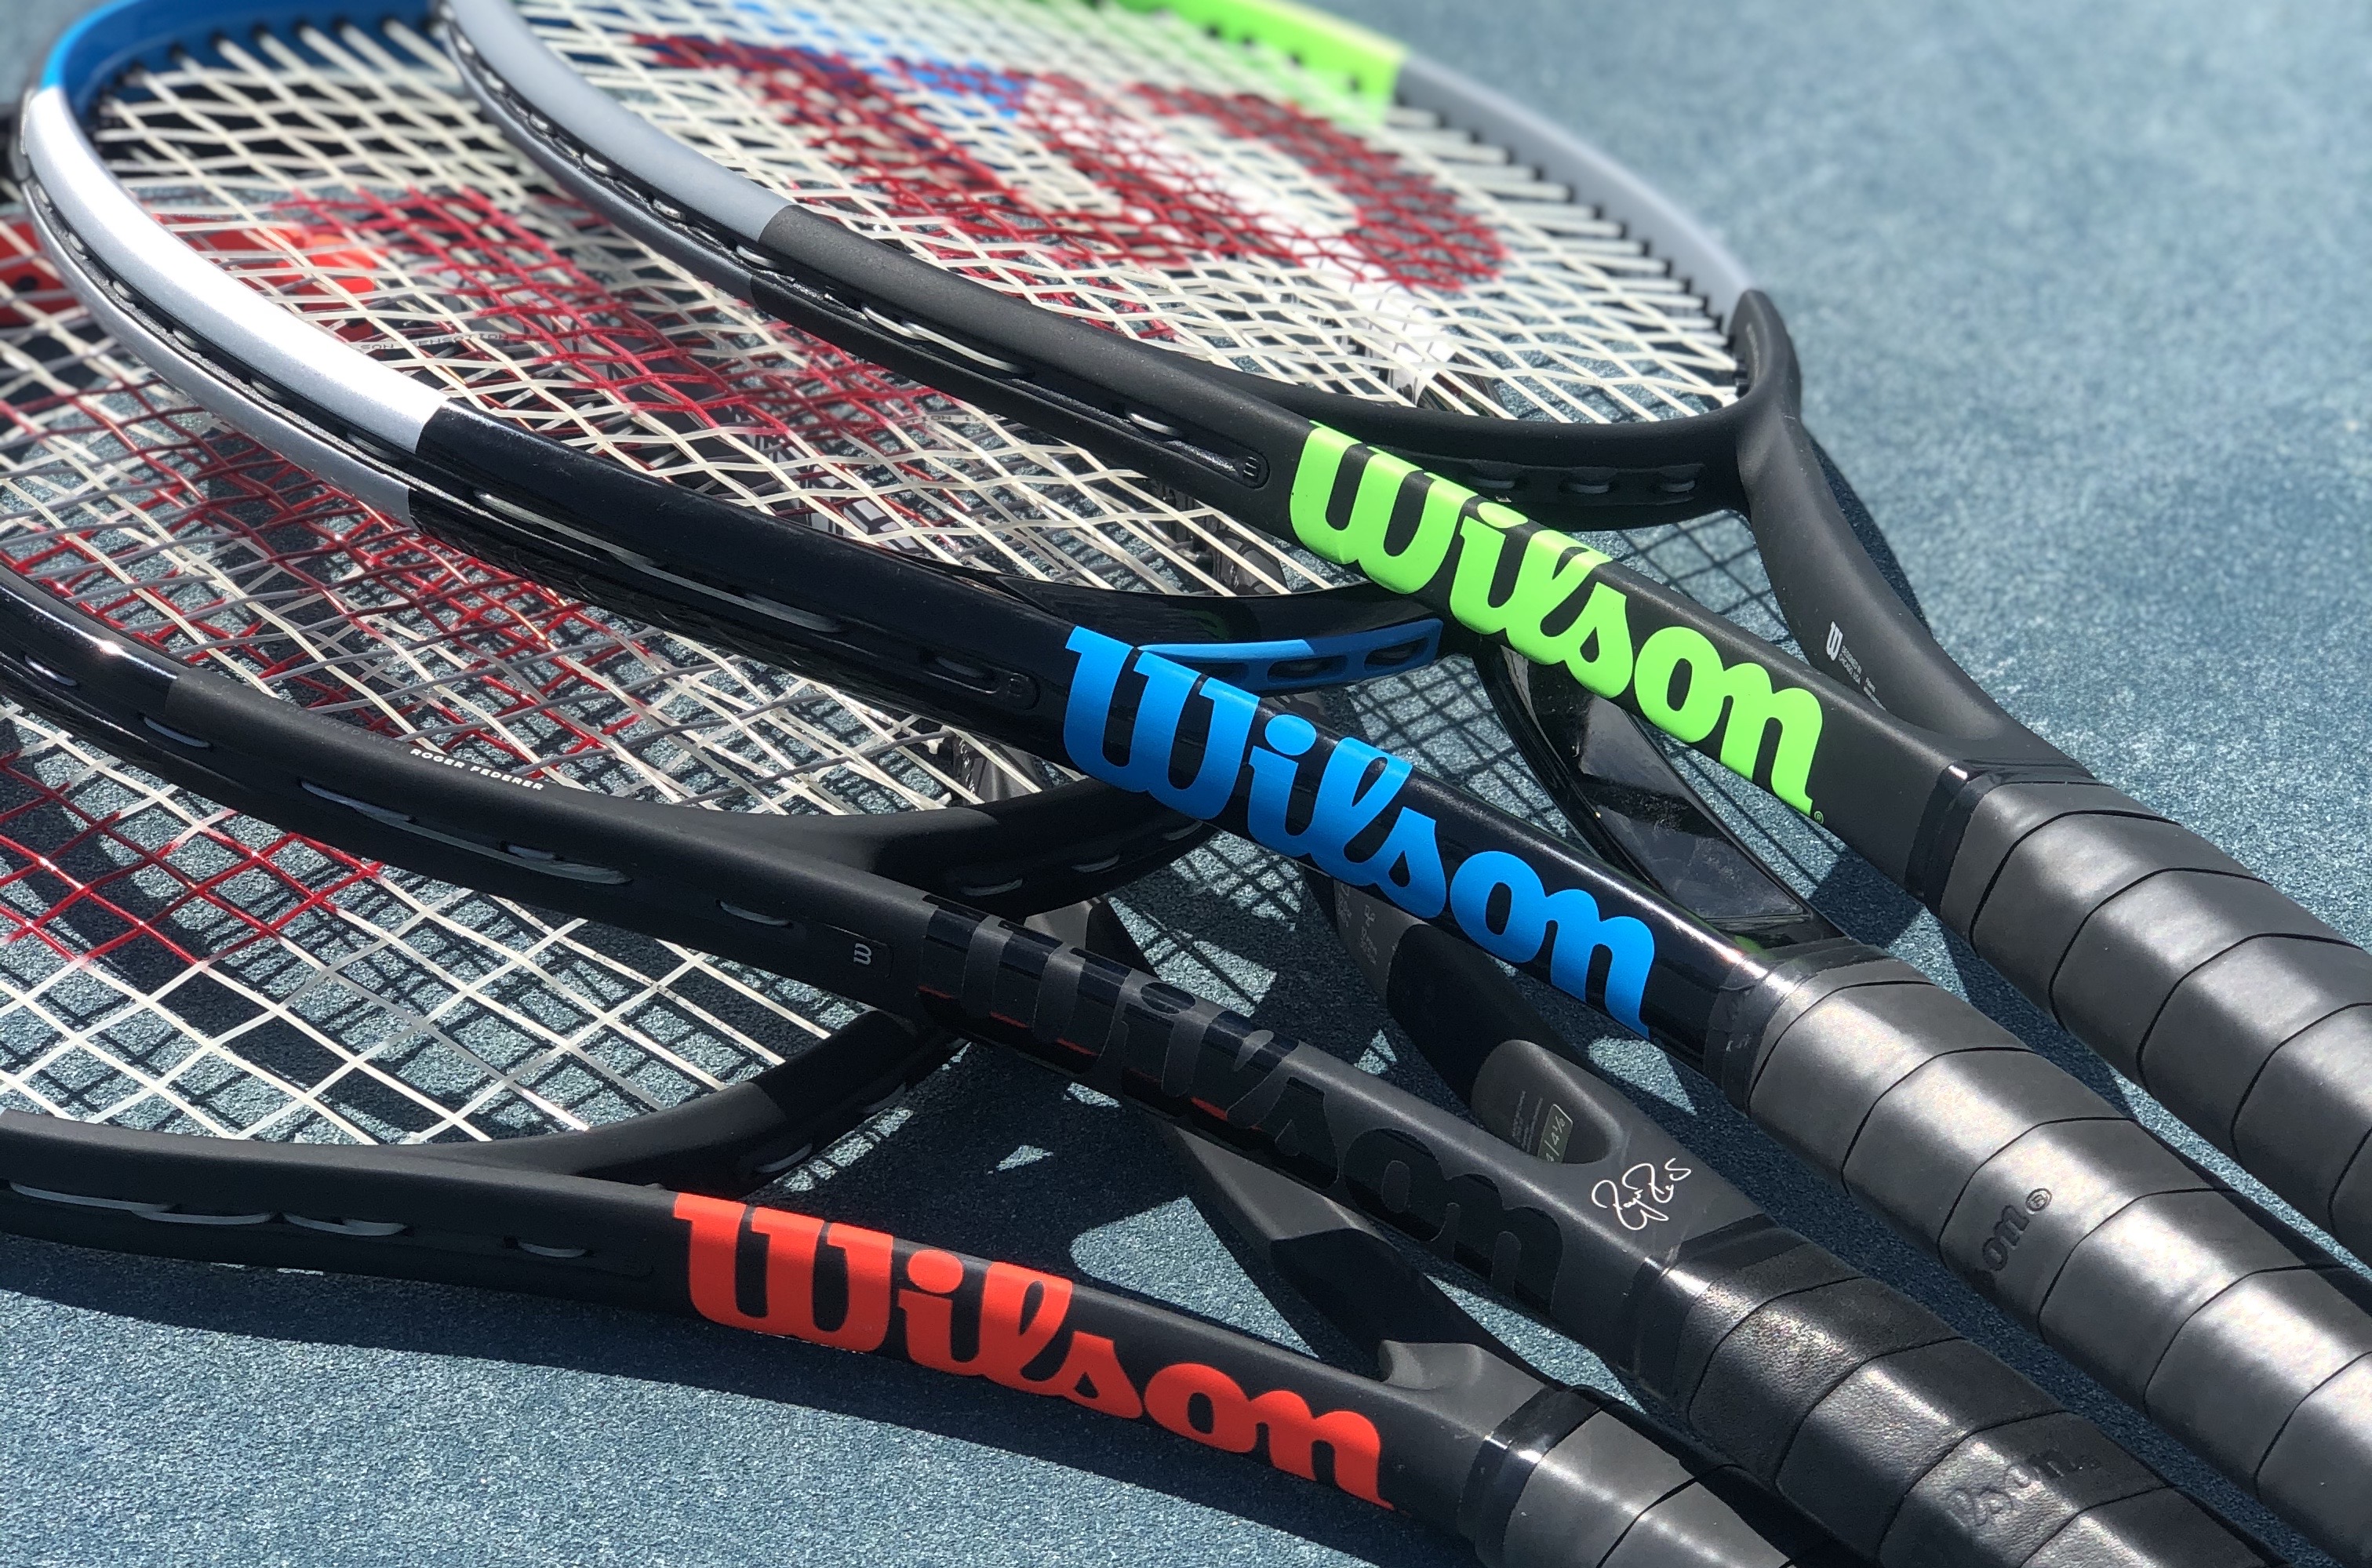 Behoort Meenemen bord Wilson Tennis on Twitter: "Wilson Racket Education (Part 1): Choosing the  Right Racket Family First - Ask yourself "What benefit am I looking for my  racket to help me with? Control, Feel,